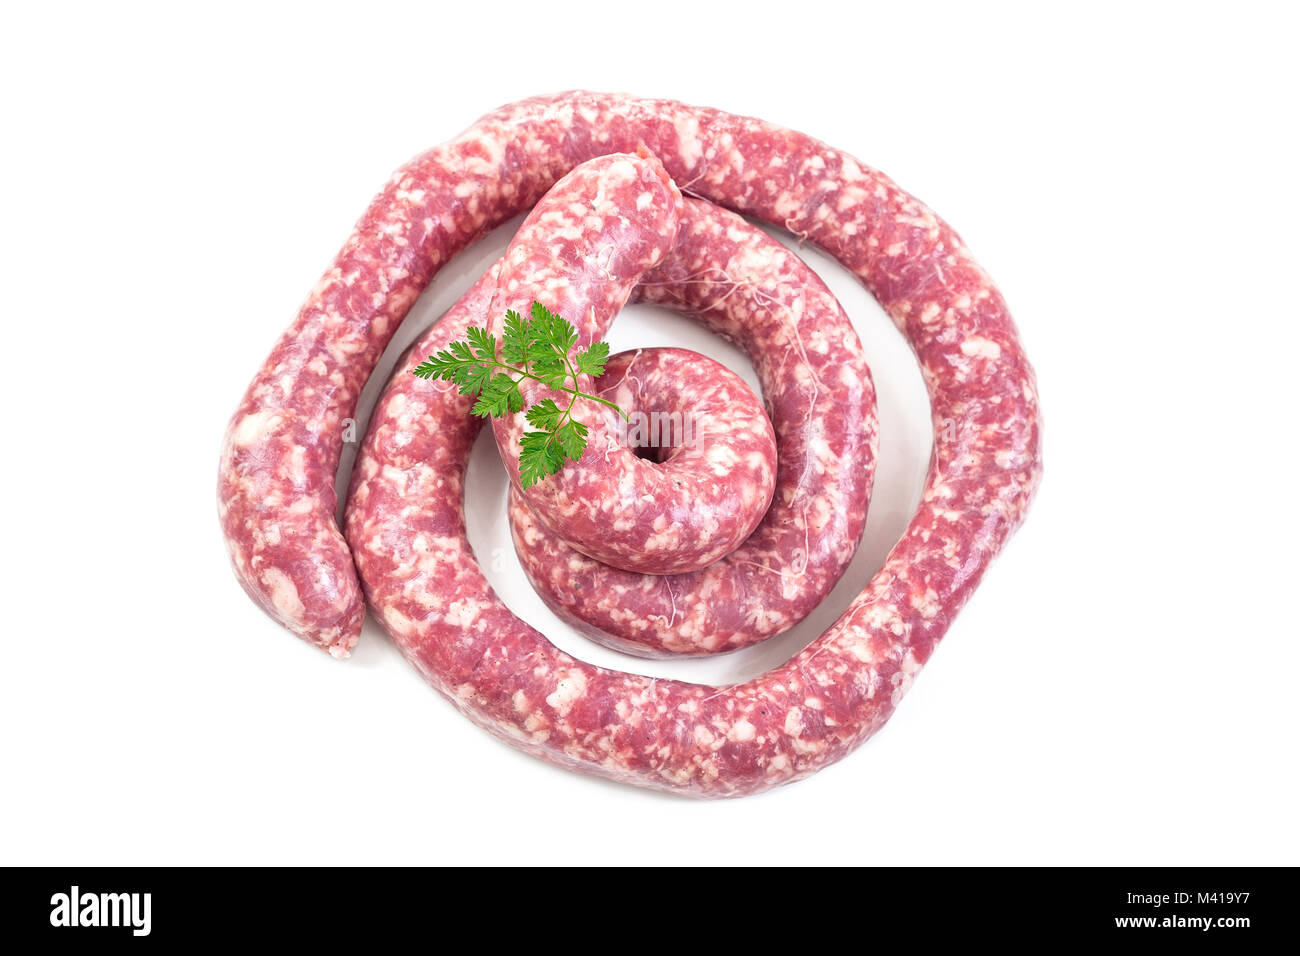 Toulouse sausage Raw 'saucisse de toulouse' in ring french meat specialty from Toulouse on white Stock Photo